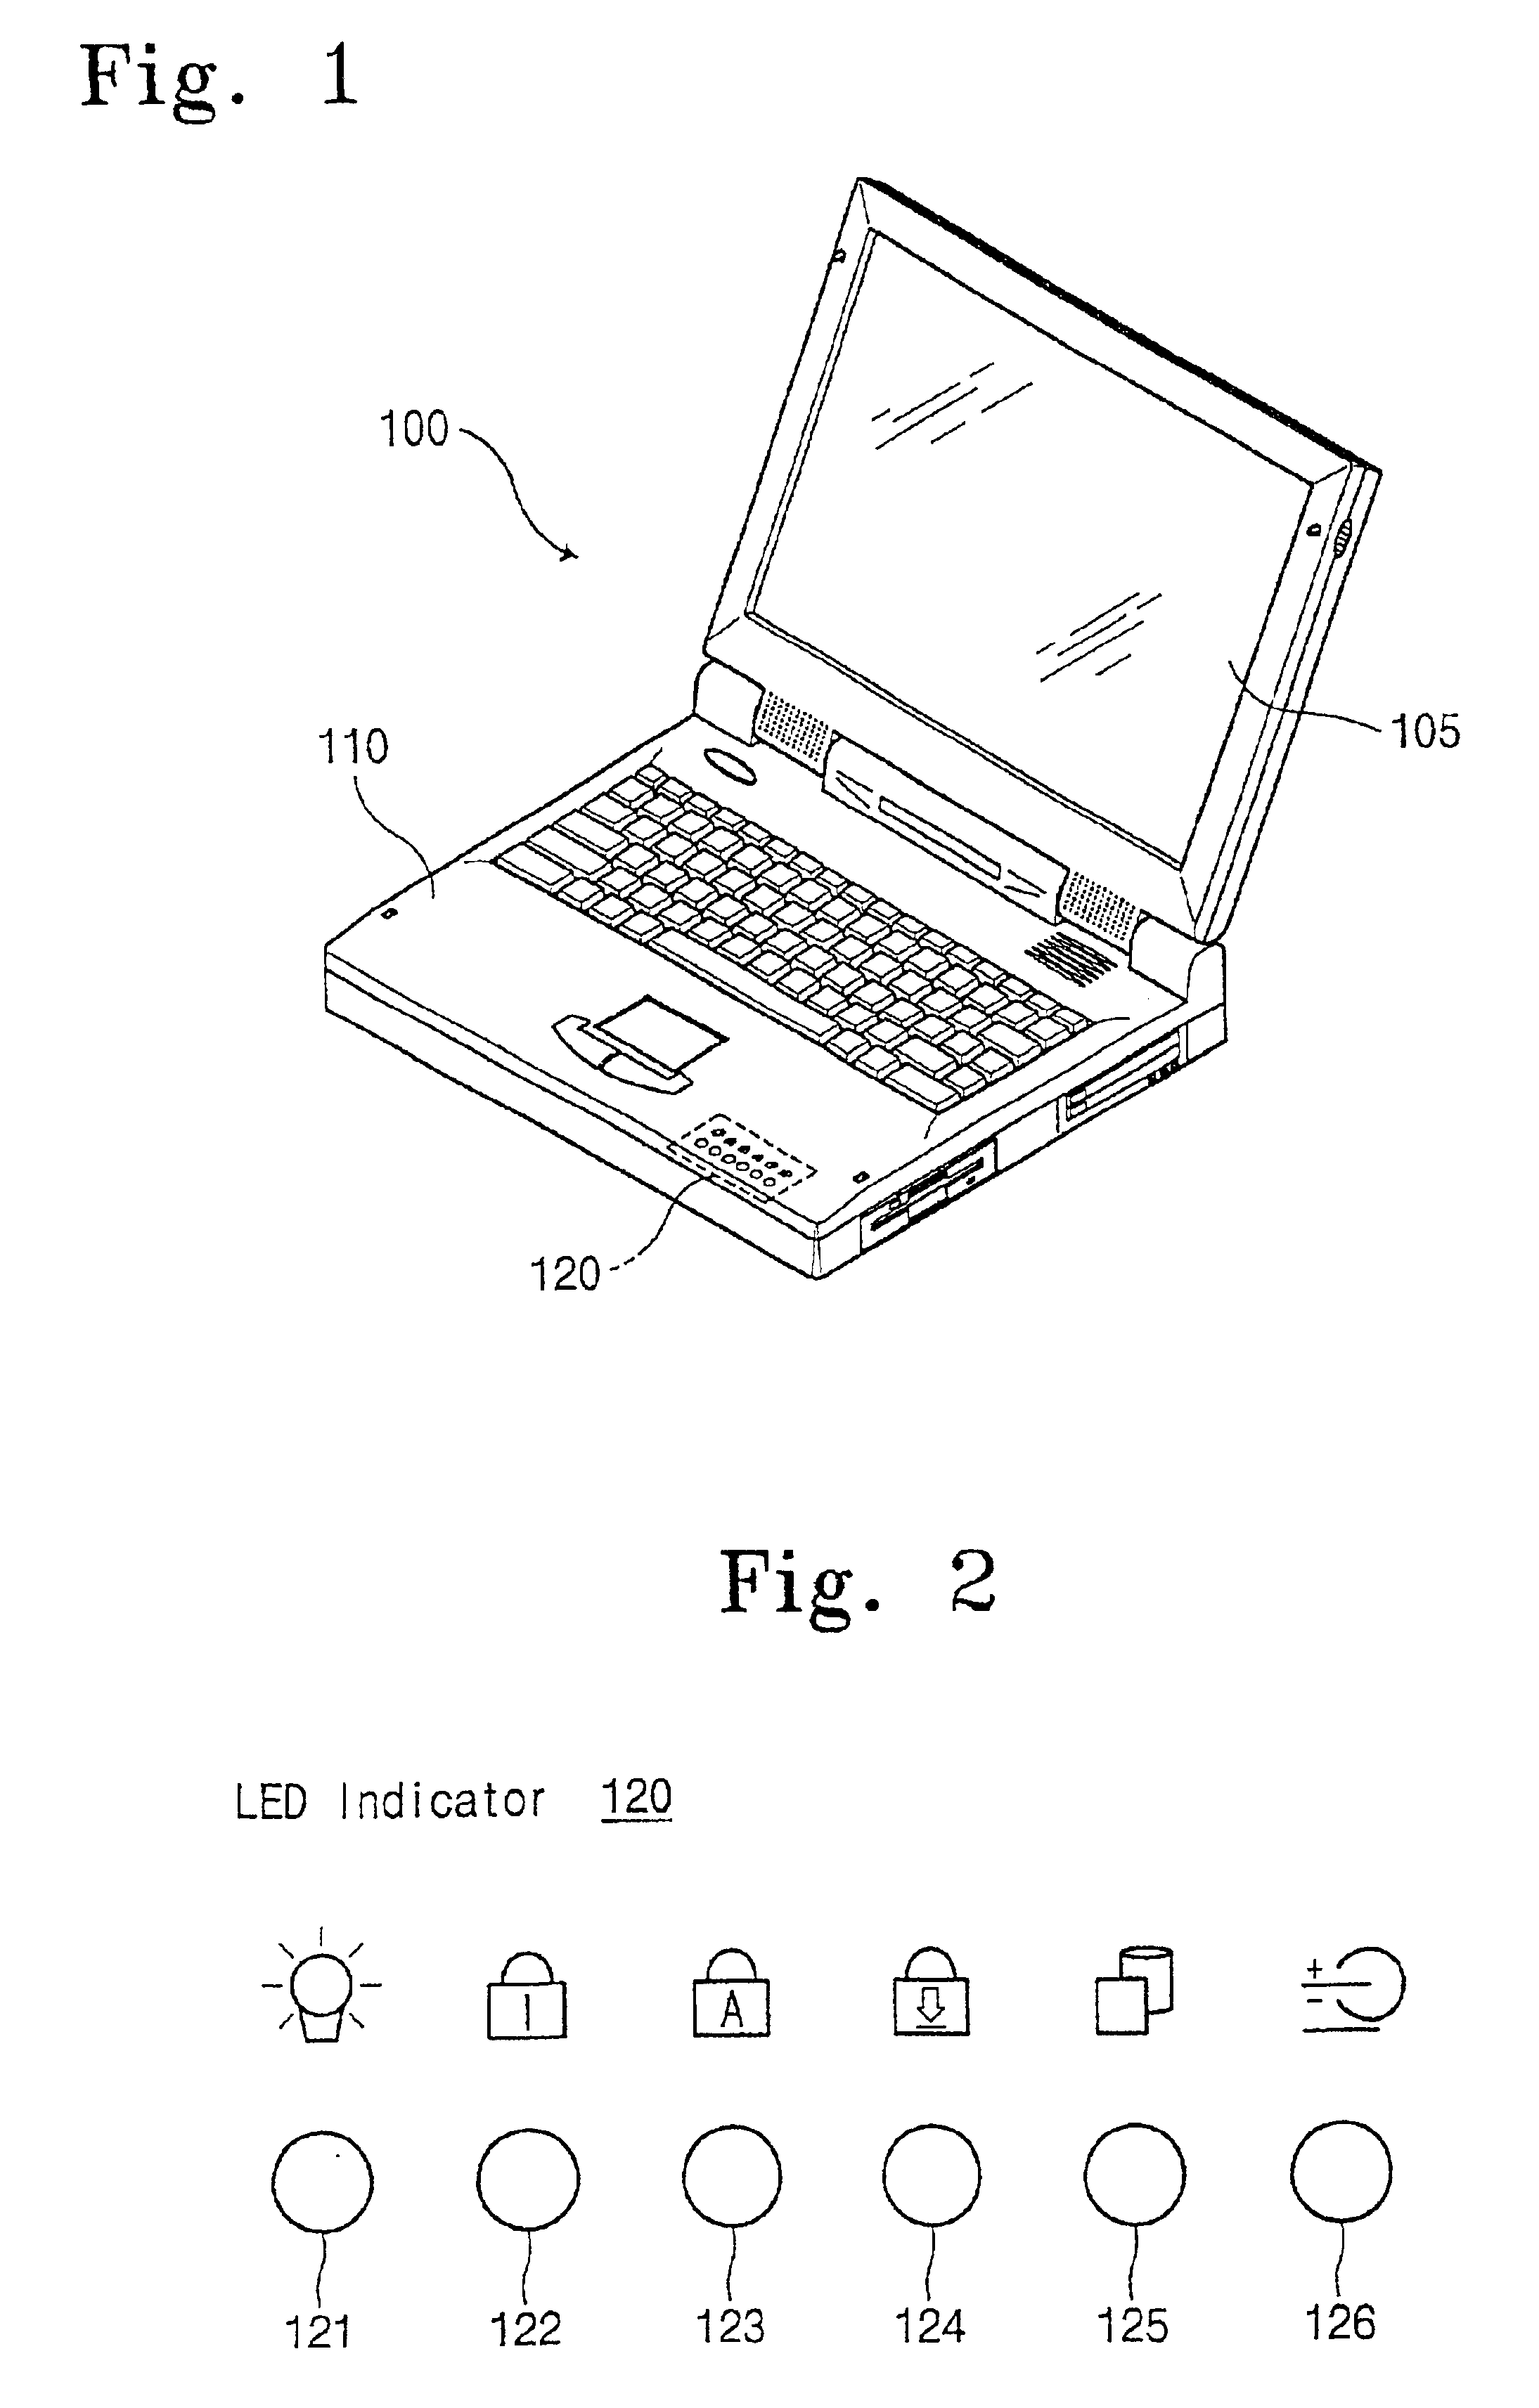 Portable computer system for indicating power-on self-test state on LED indicator